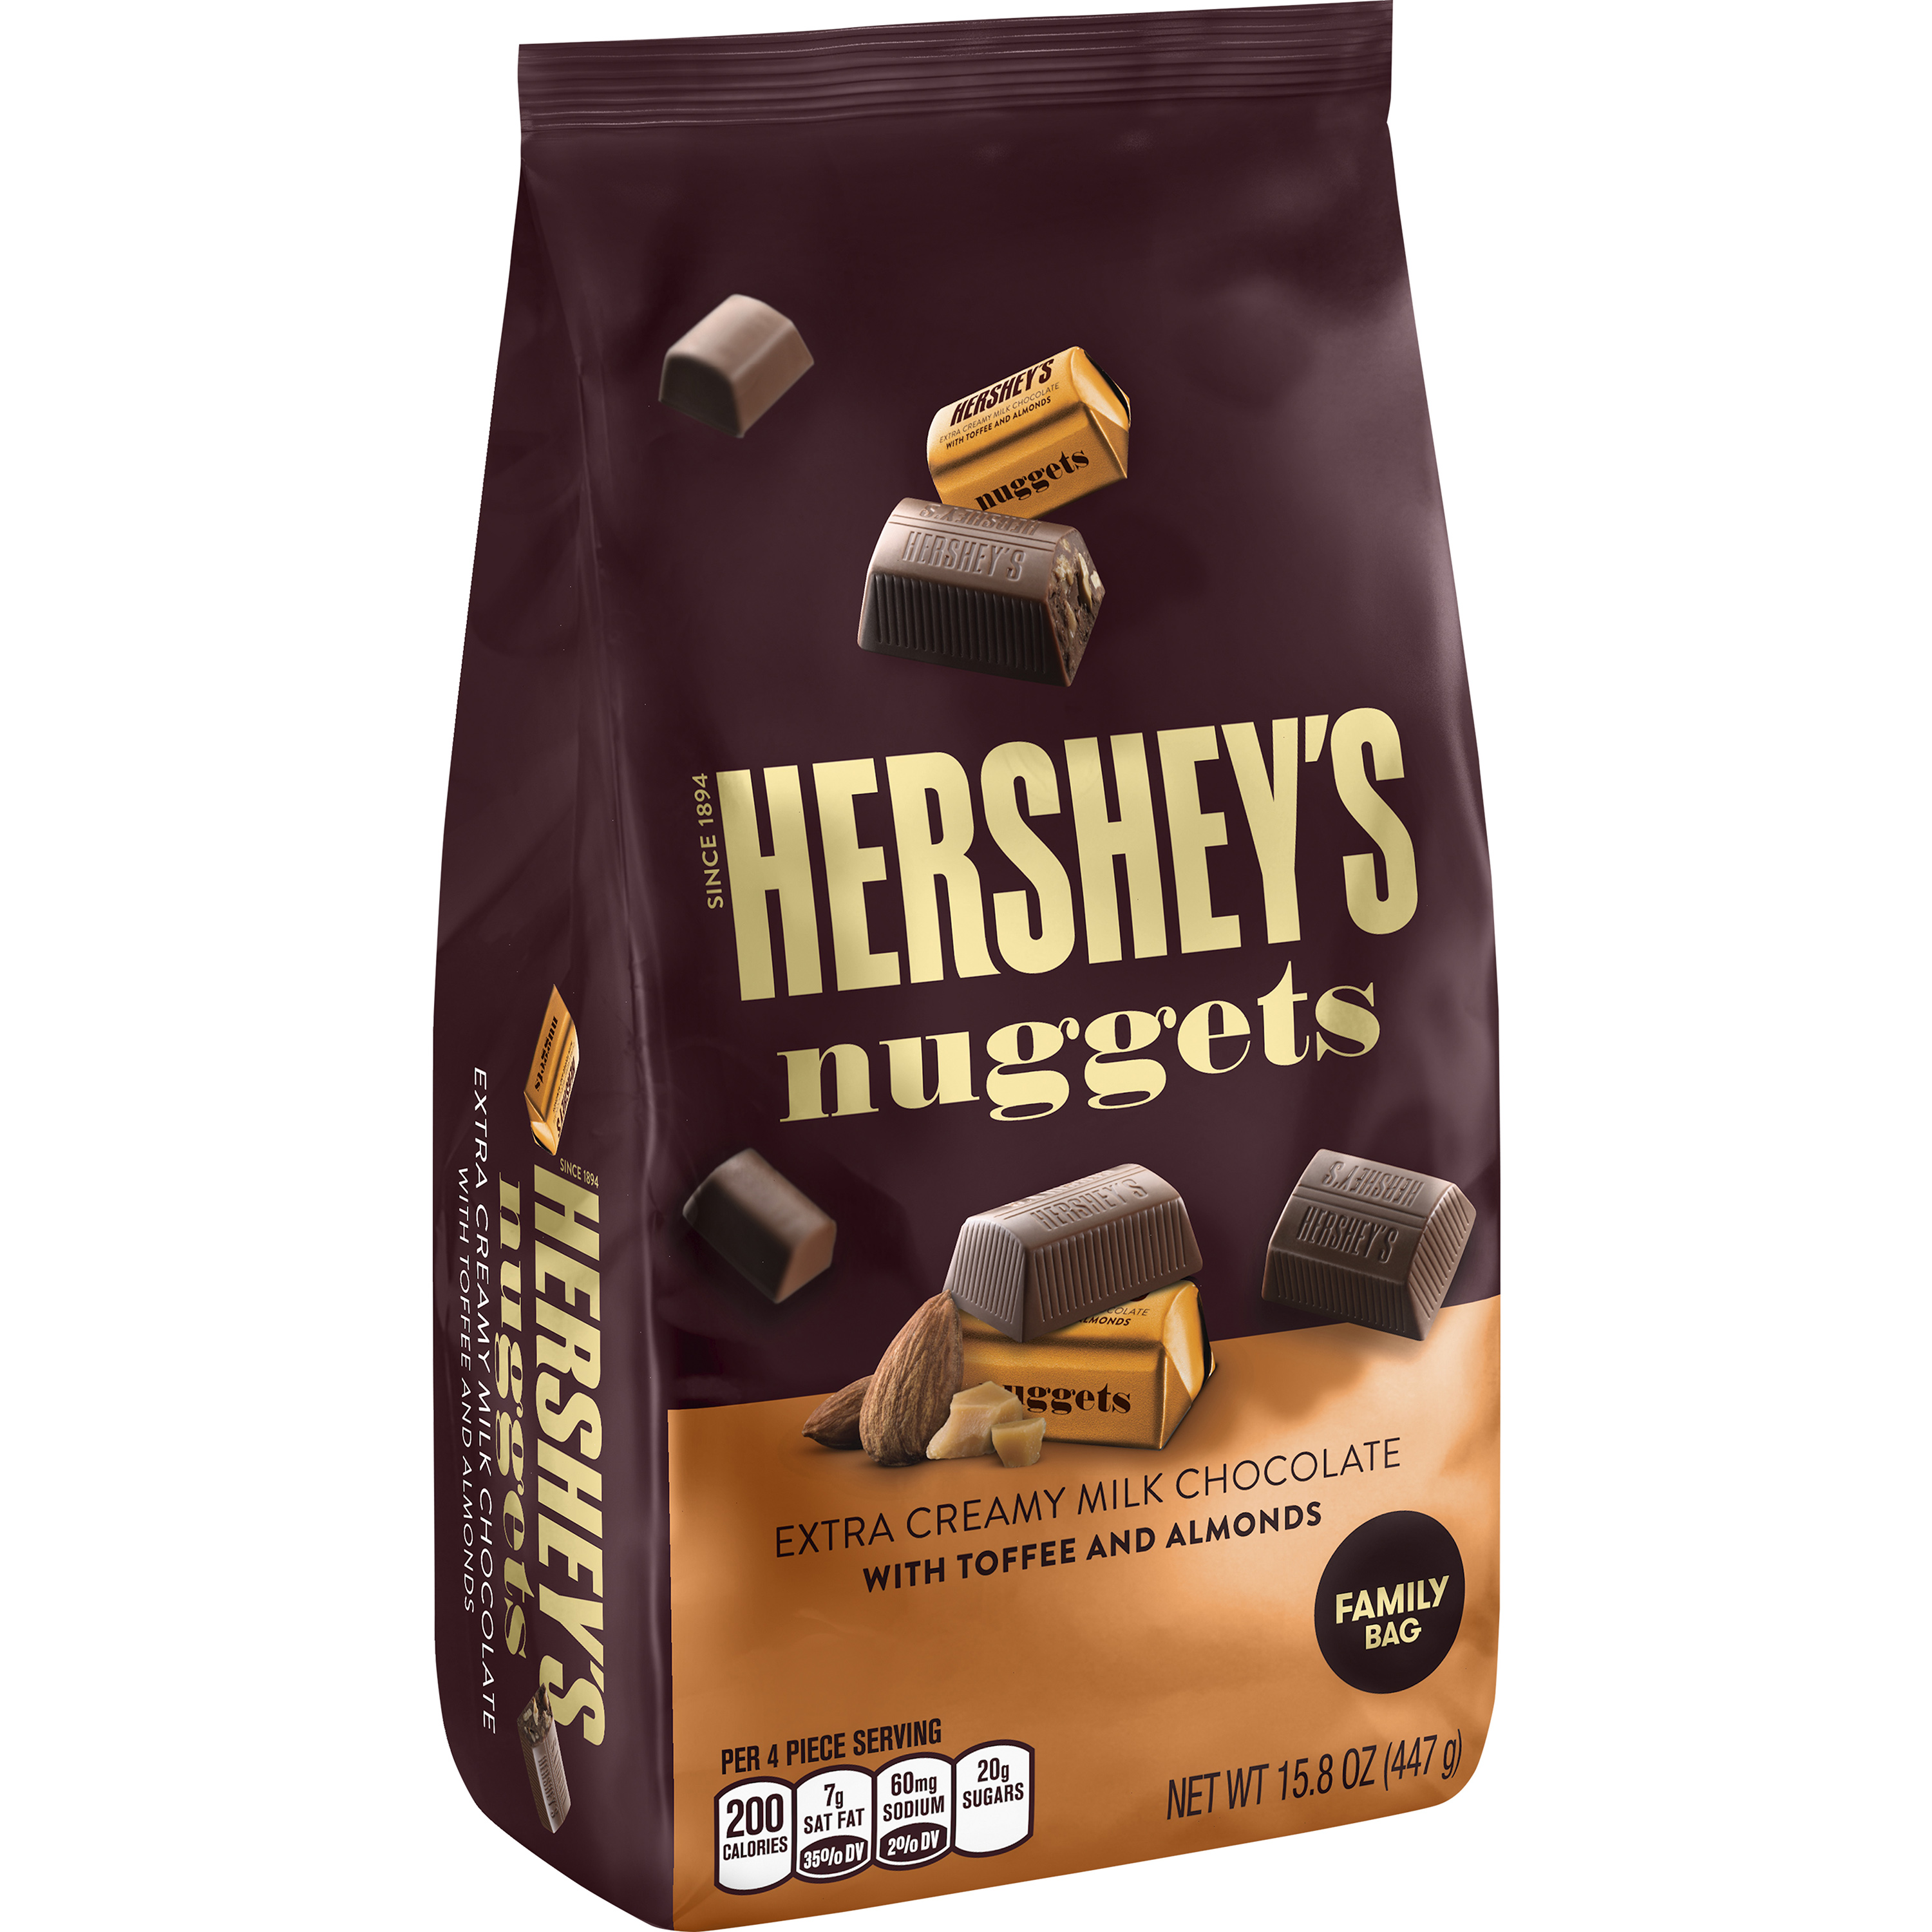 Hershey's Nuggets Milk Chocolate with Almonds, 15.8 Oz. - image 1 of 4